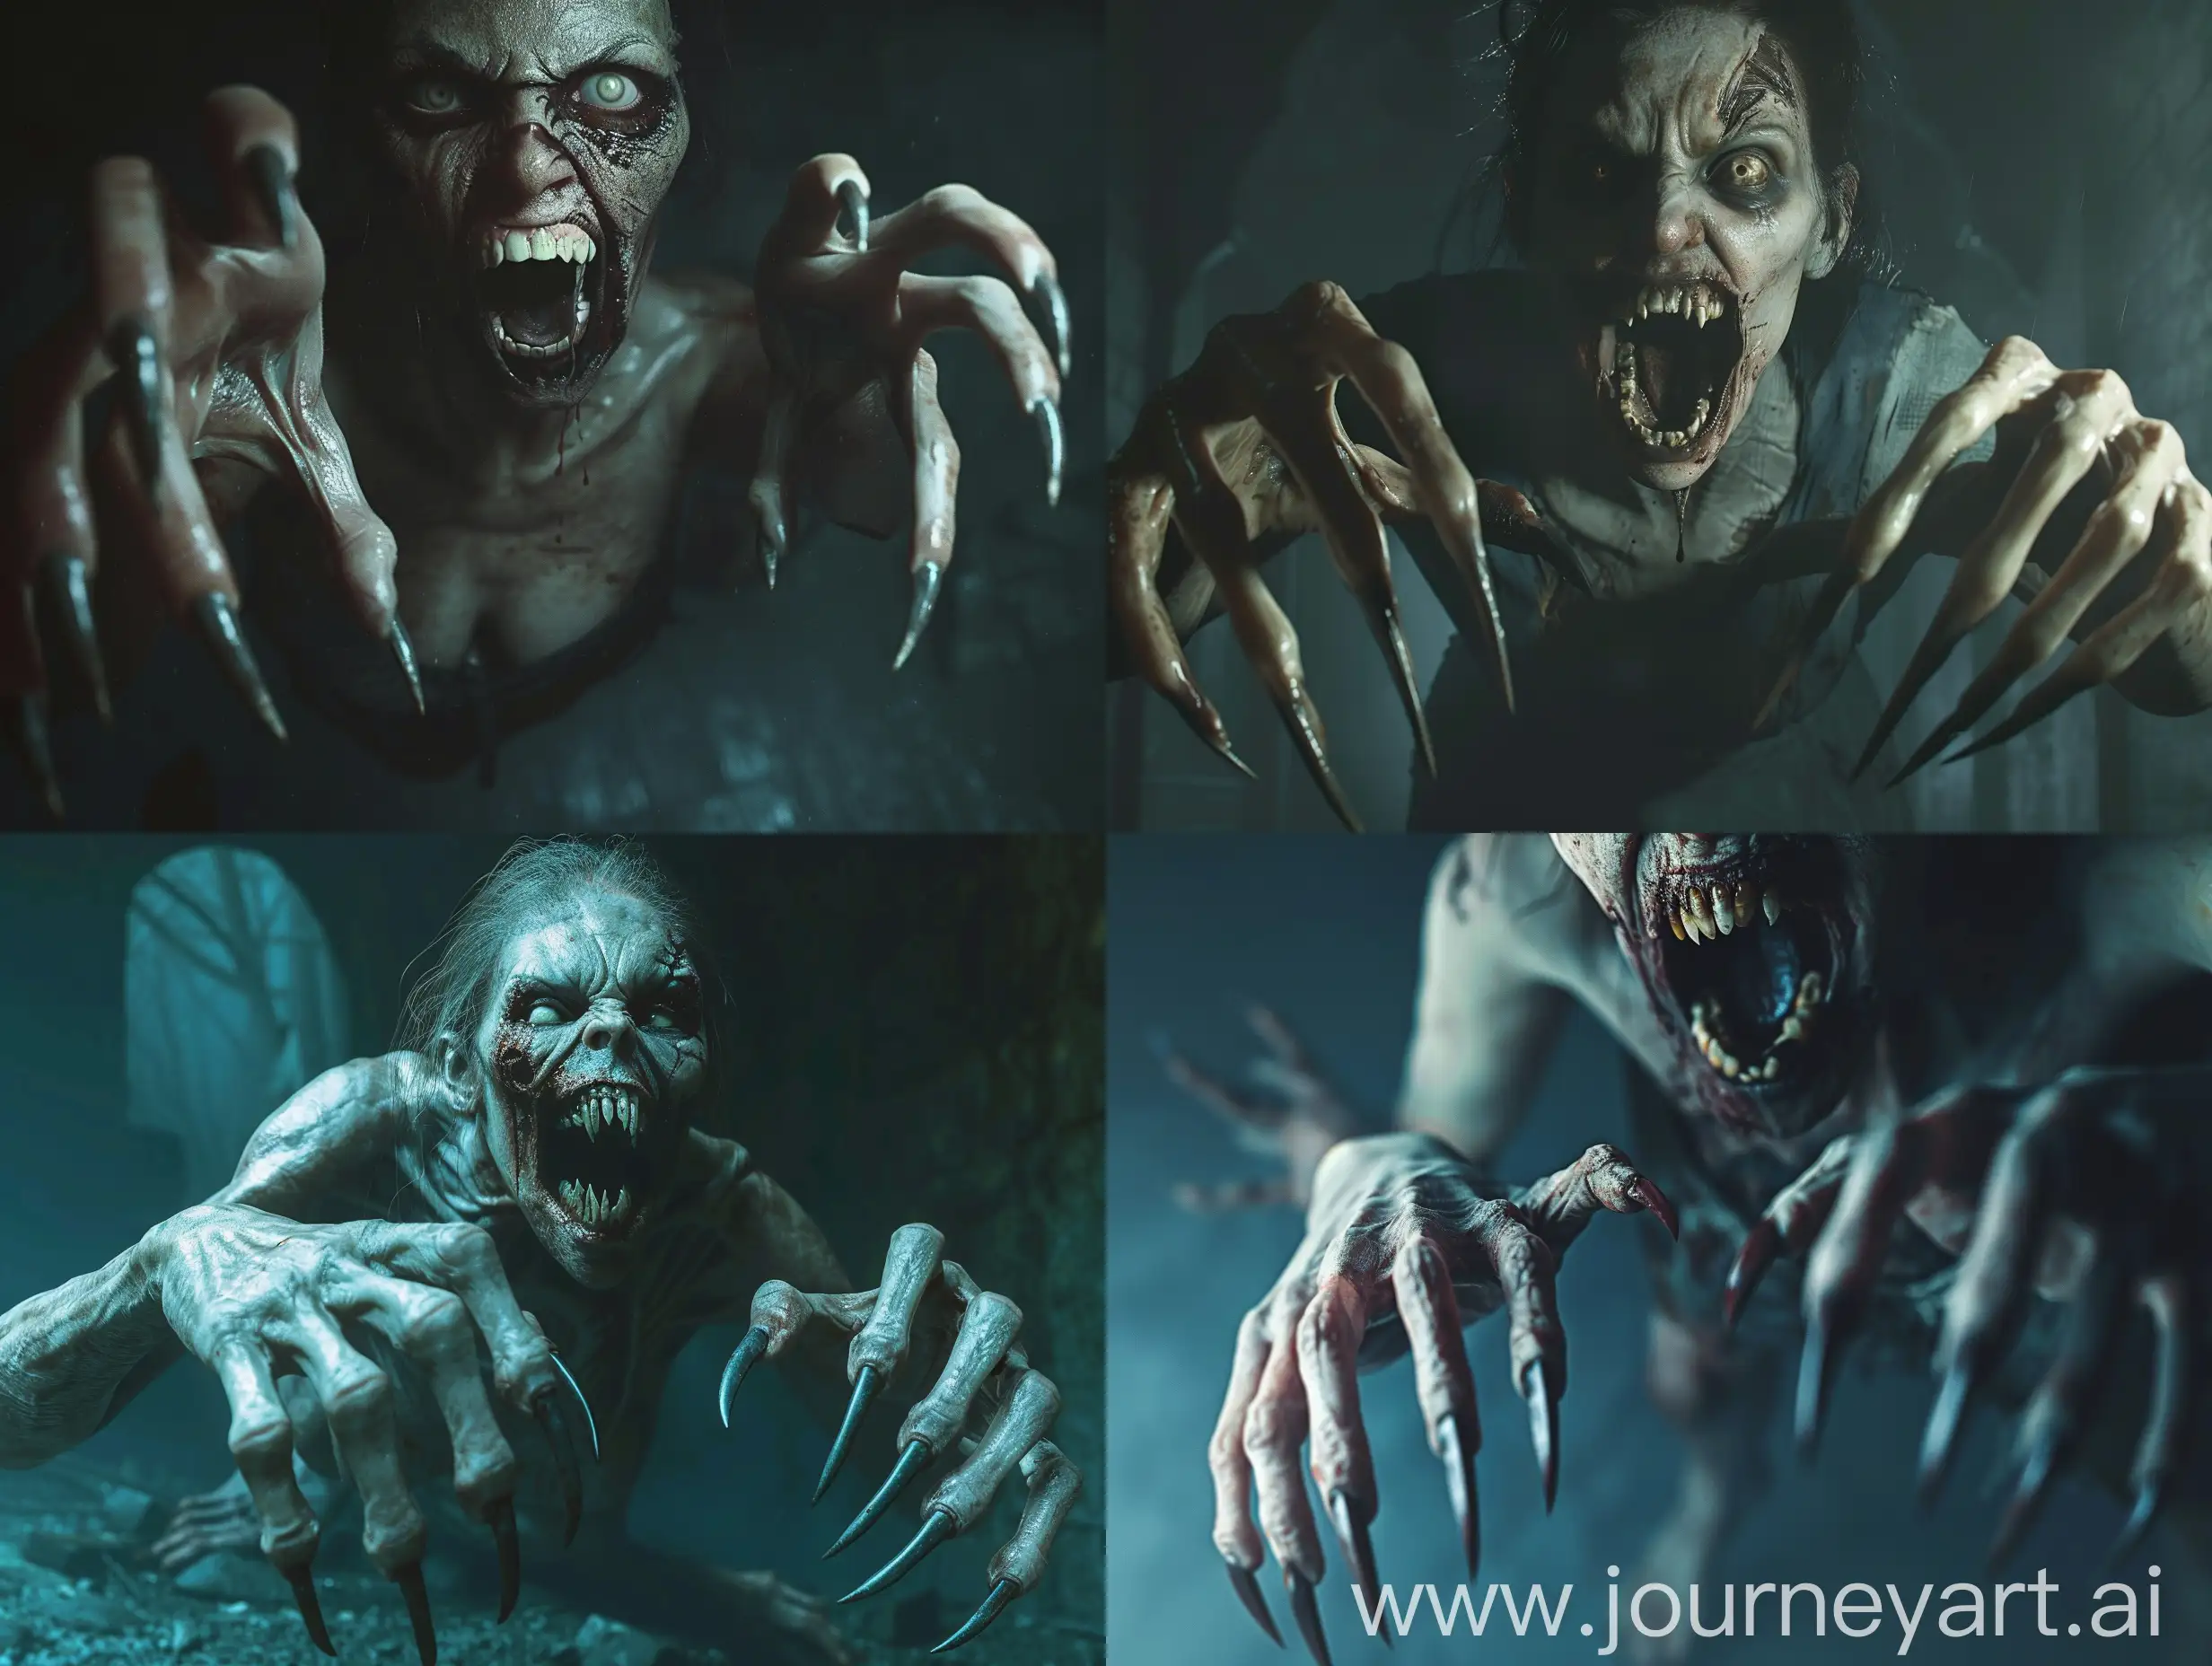 Nightmare-Zombie-Woman-with-Clawed-Hands-Hauntingly-Realistic-Horror-Scene